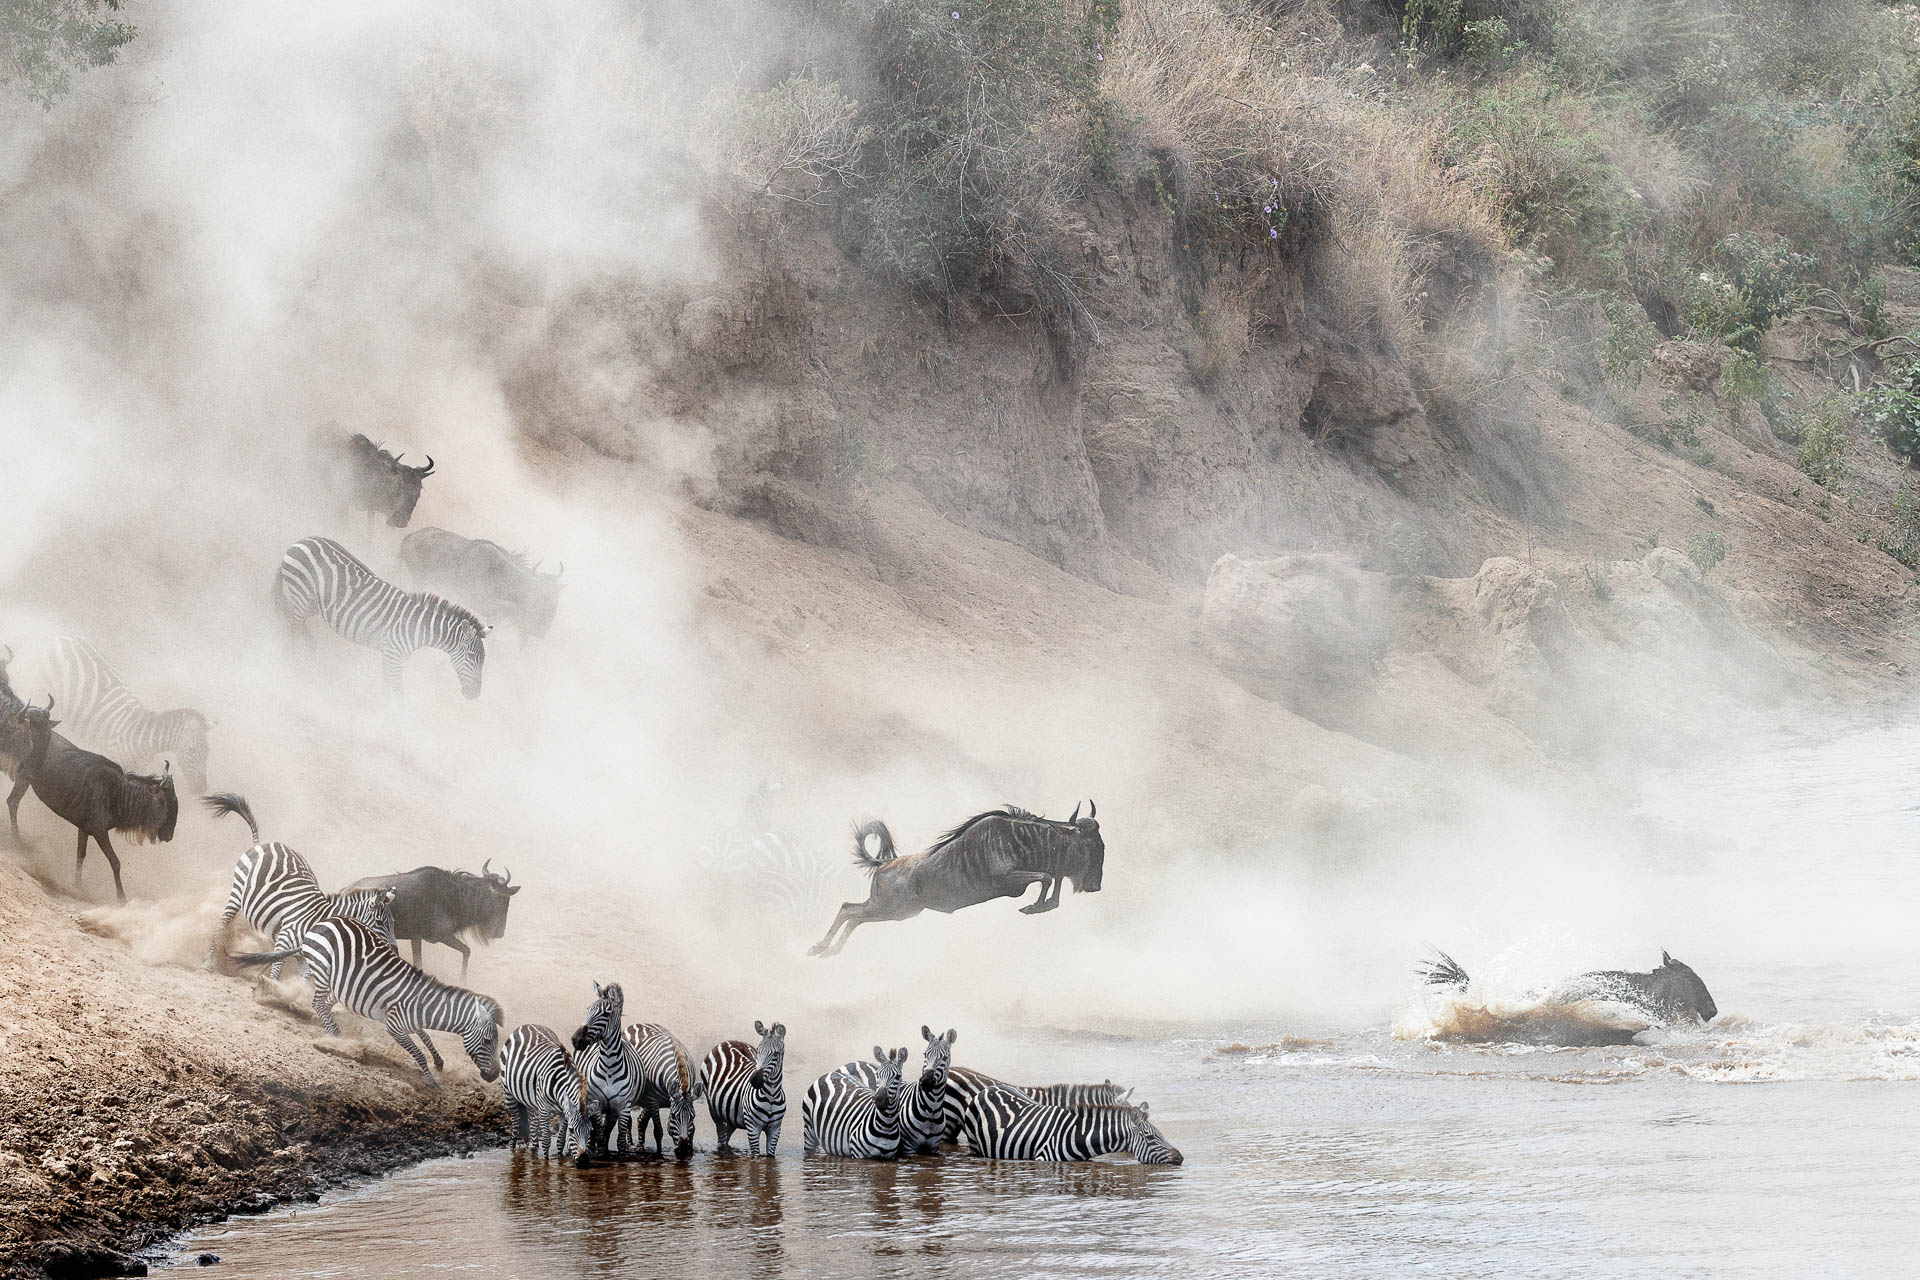 Dramatic photo herds of zebra and wildebeest leaping into the Mara River in Kenya, Africa during migration season